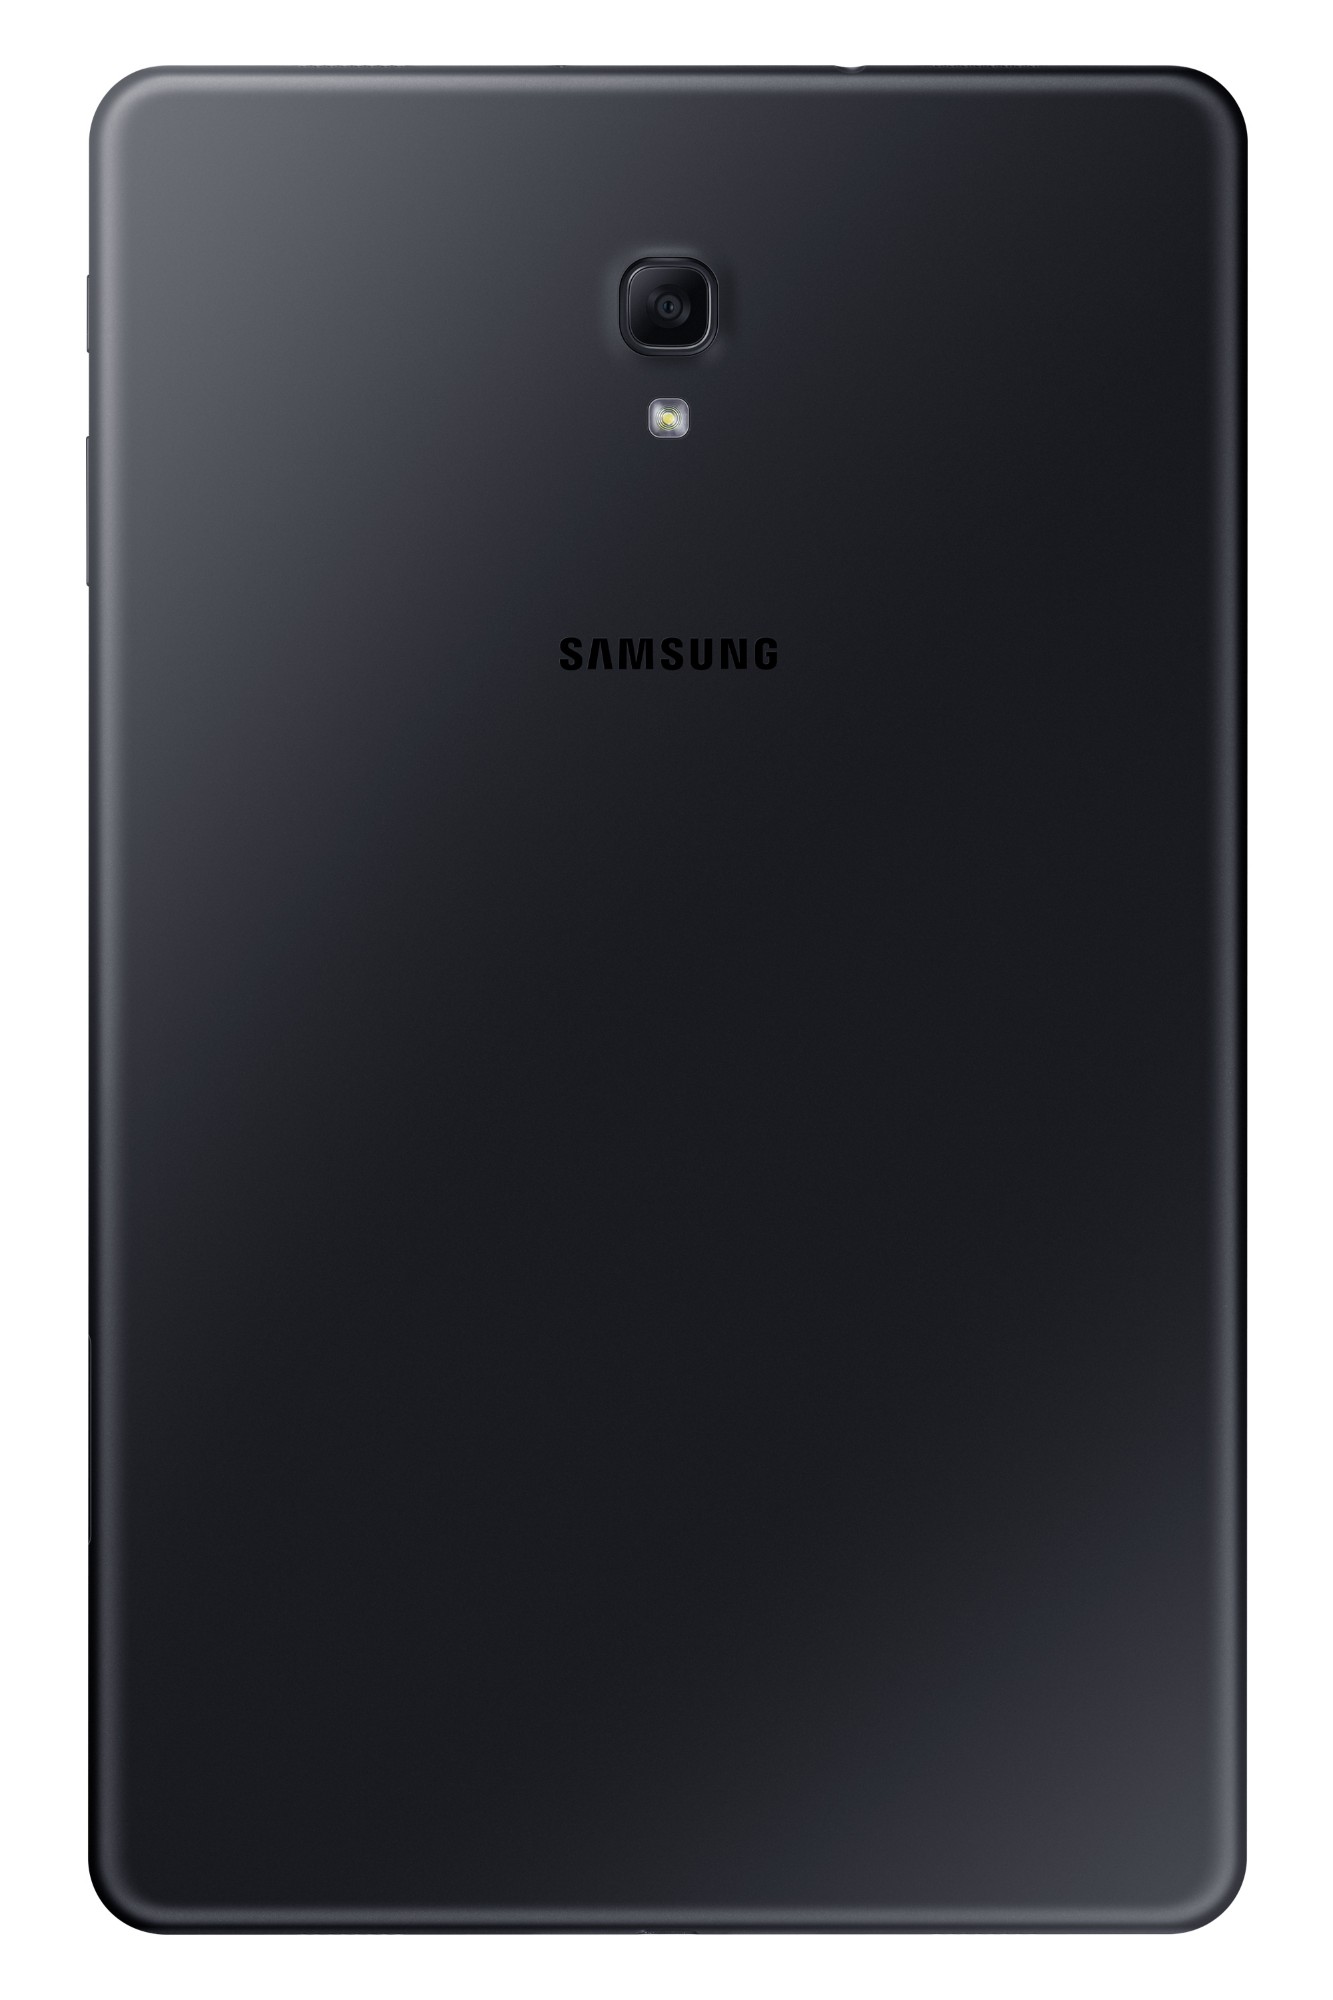 Samsung Launches Galaxy Z Flip 5g With Qualcomm Snapdragon